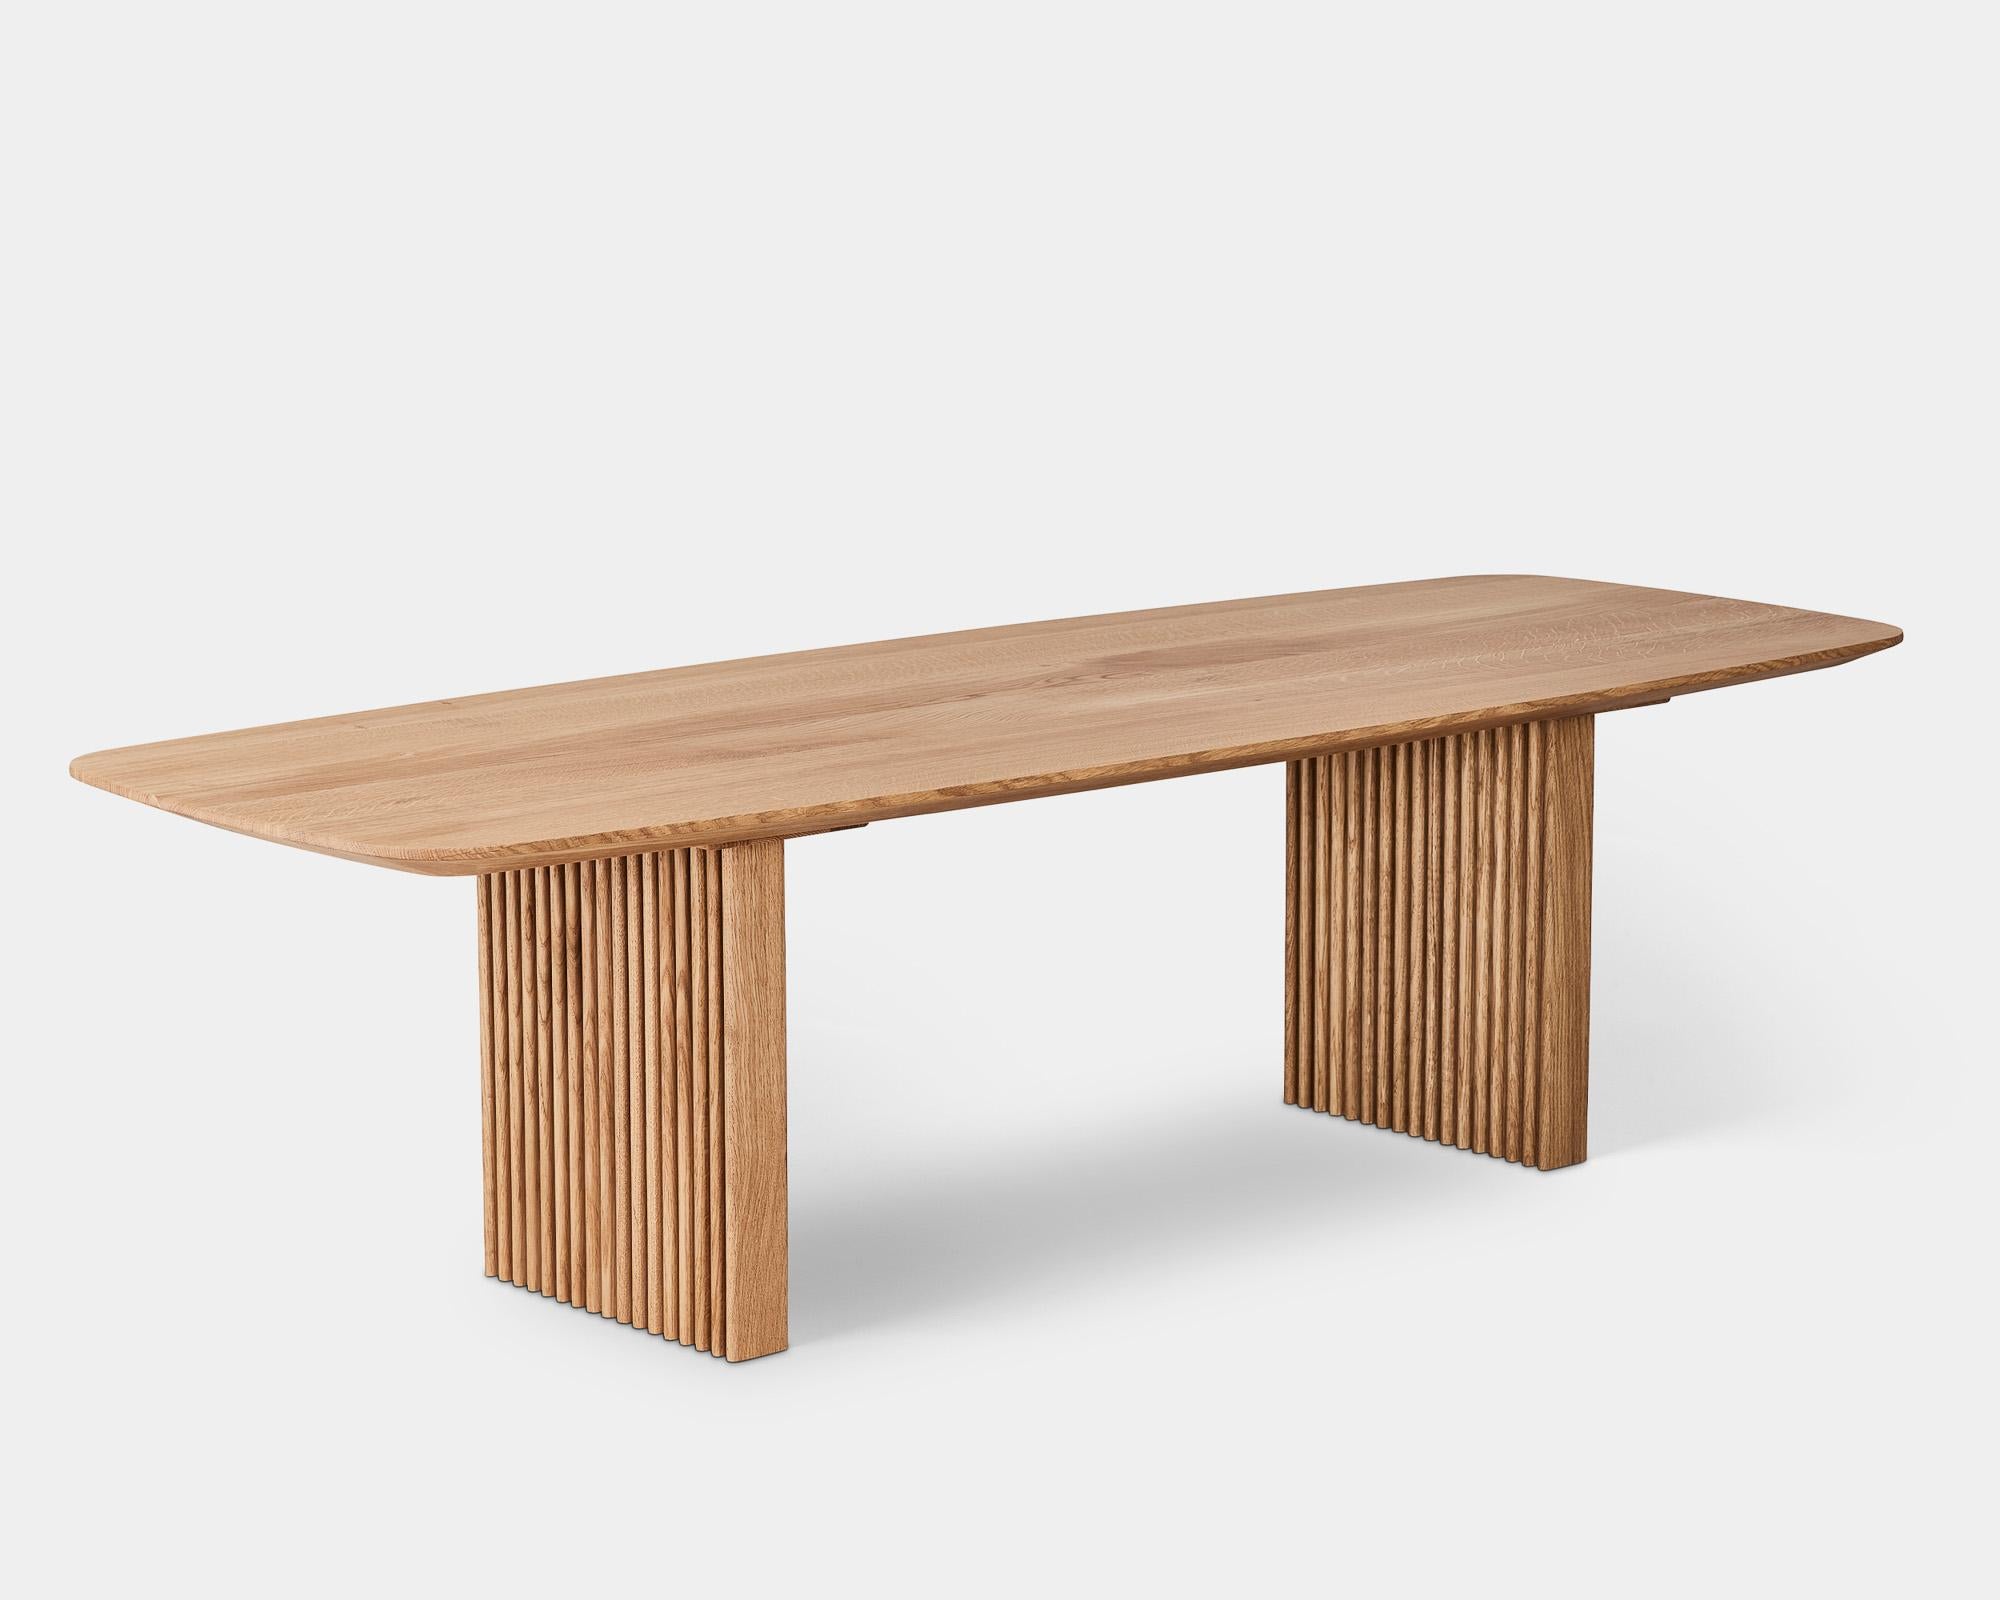 TEN coffee table
Solid wood tabletop and legs

Table height
– 50 cm
– 40 cm
– 45 cm
Tabletop dimensions:
– 140 x 60 cm
– 150 x 60 cm
– 160 x 60 cm
Table top thickness: 3 cm

Wood:
– Oak
– Smoked oak
– Walnut.